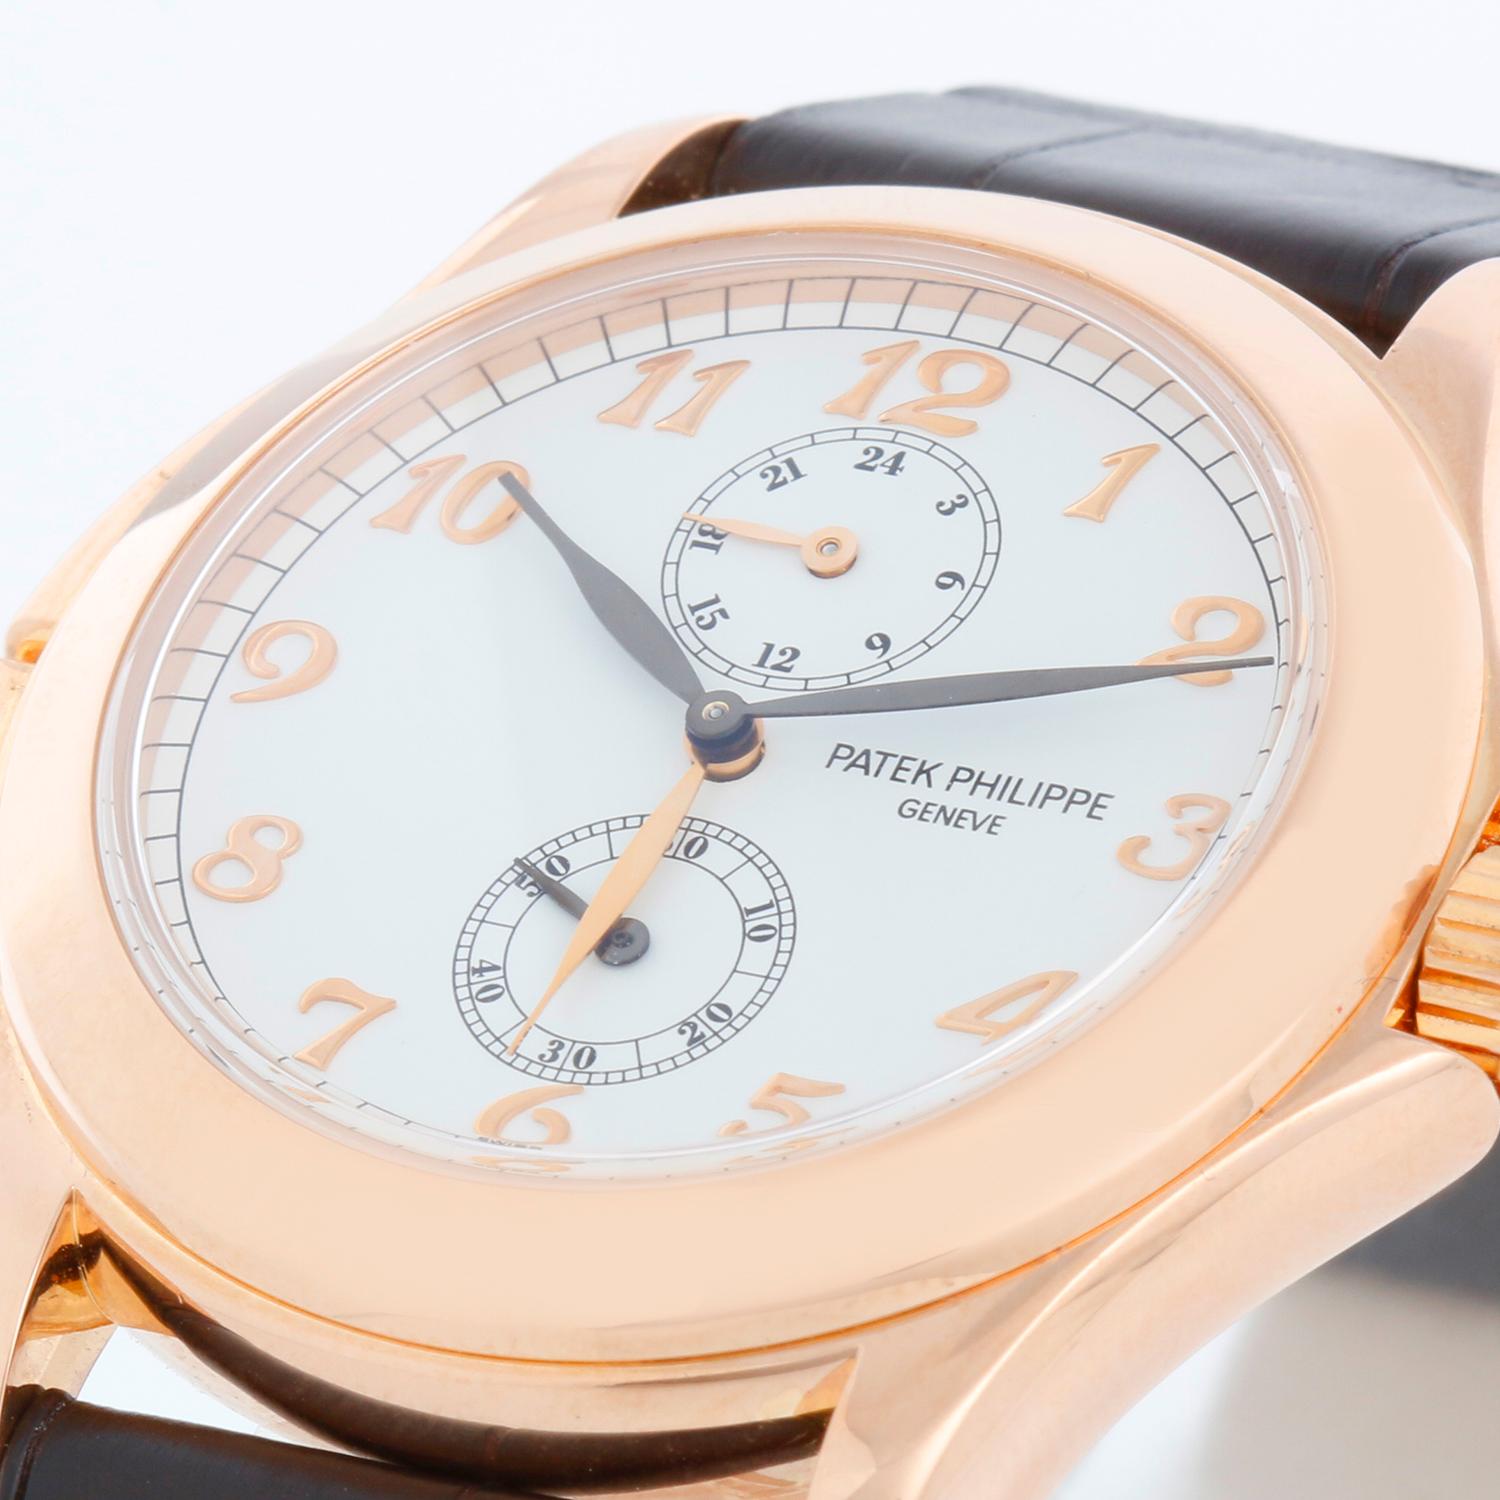 Collectible Patek Philippe Travel Time Men's 18k Rose Gold Watch 5134 R or 5134R In Excellent Condition For Sale In Dallas, TX